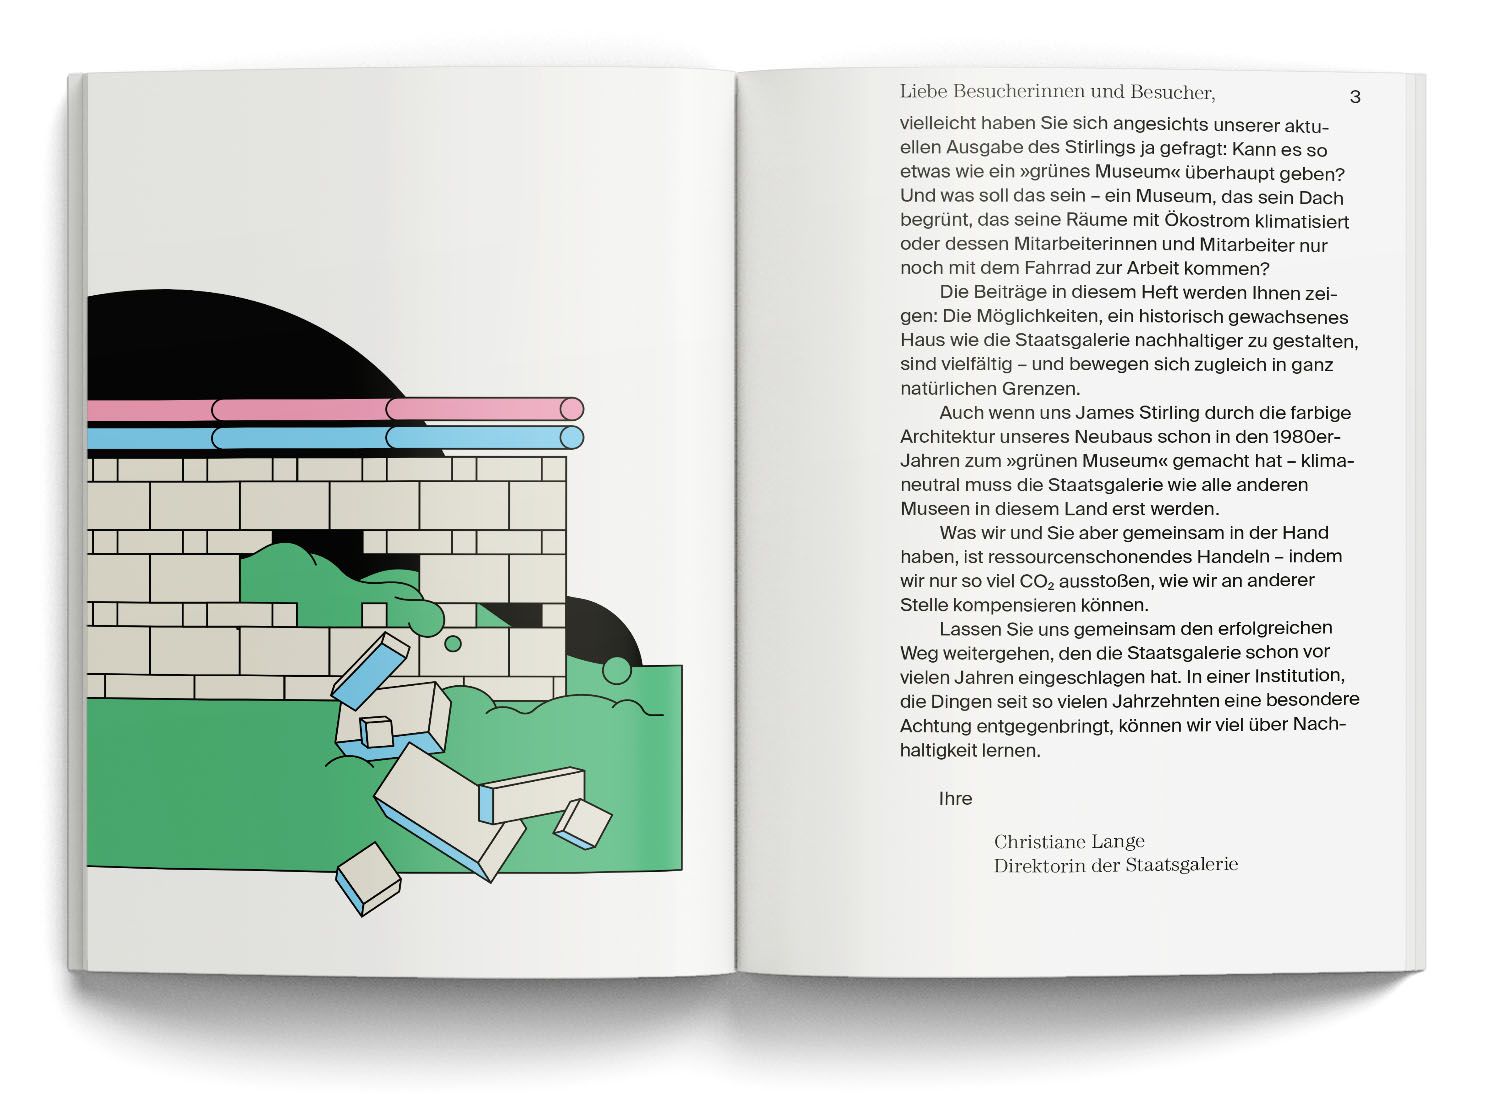 Magazine page with illustration of Staatsgalerie Stuttgart, by James Stirling. Illustration by Axel Pfaender.